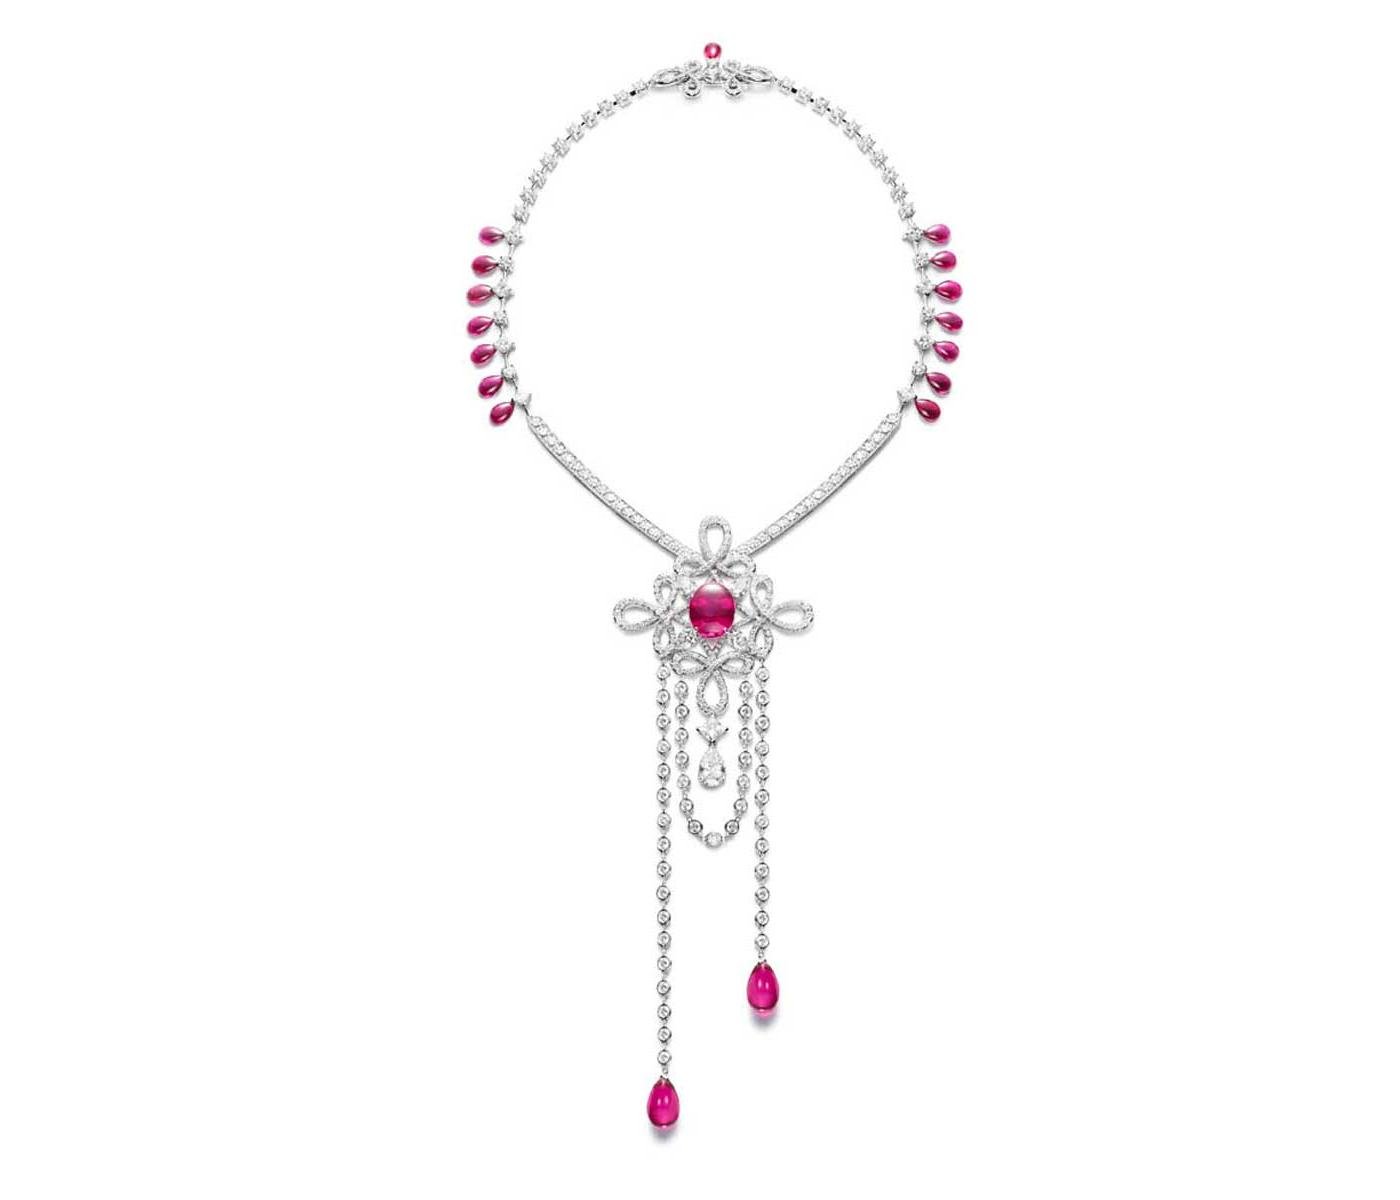 Necklace by Piaget